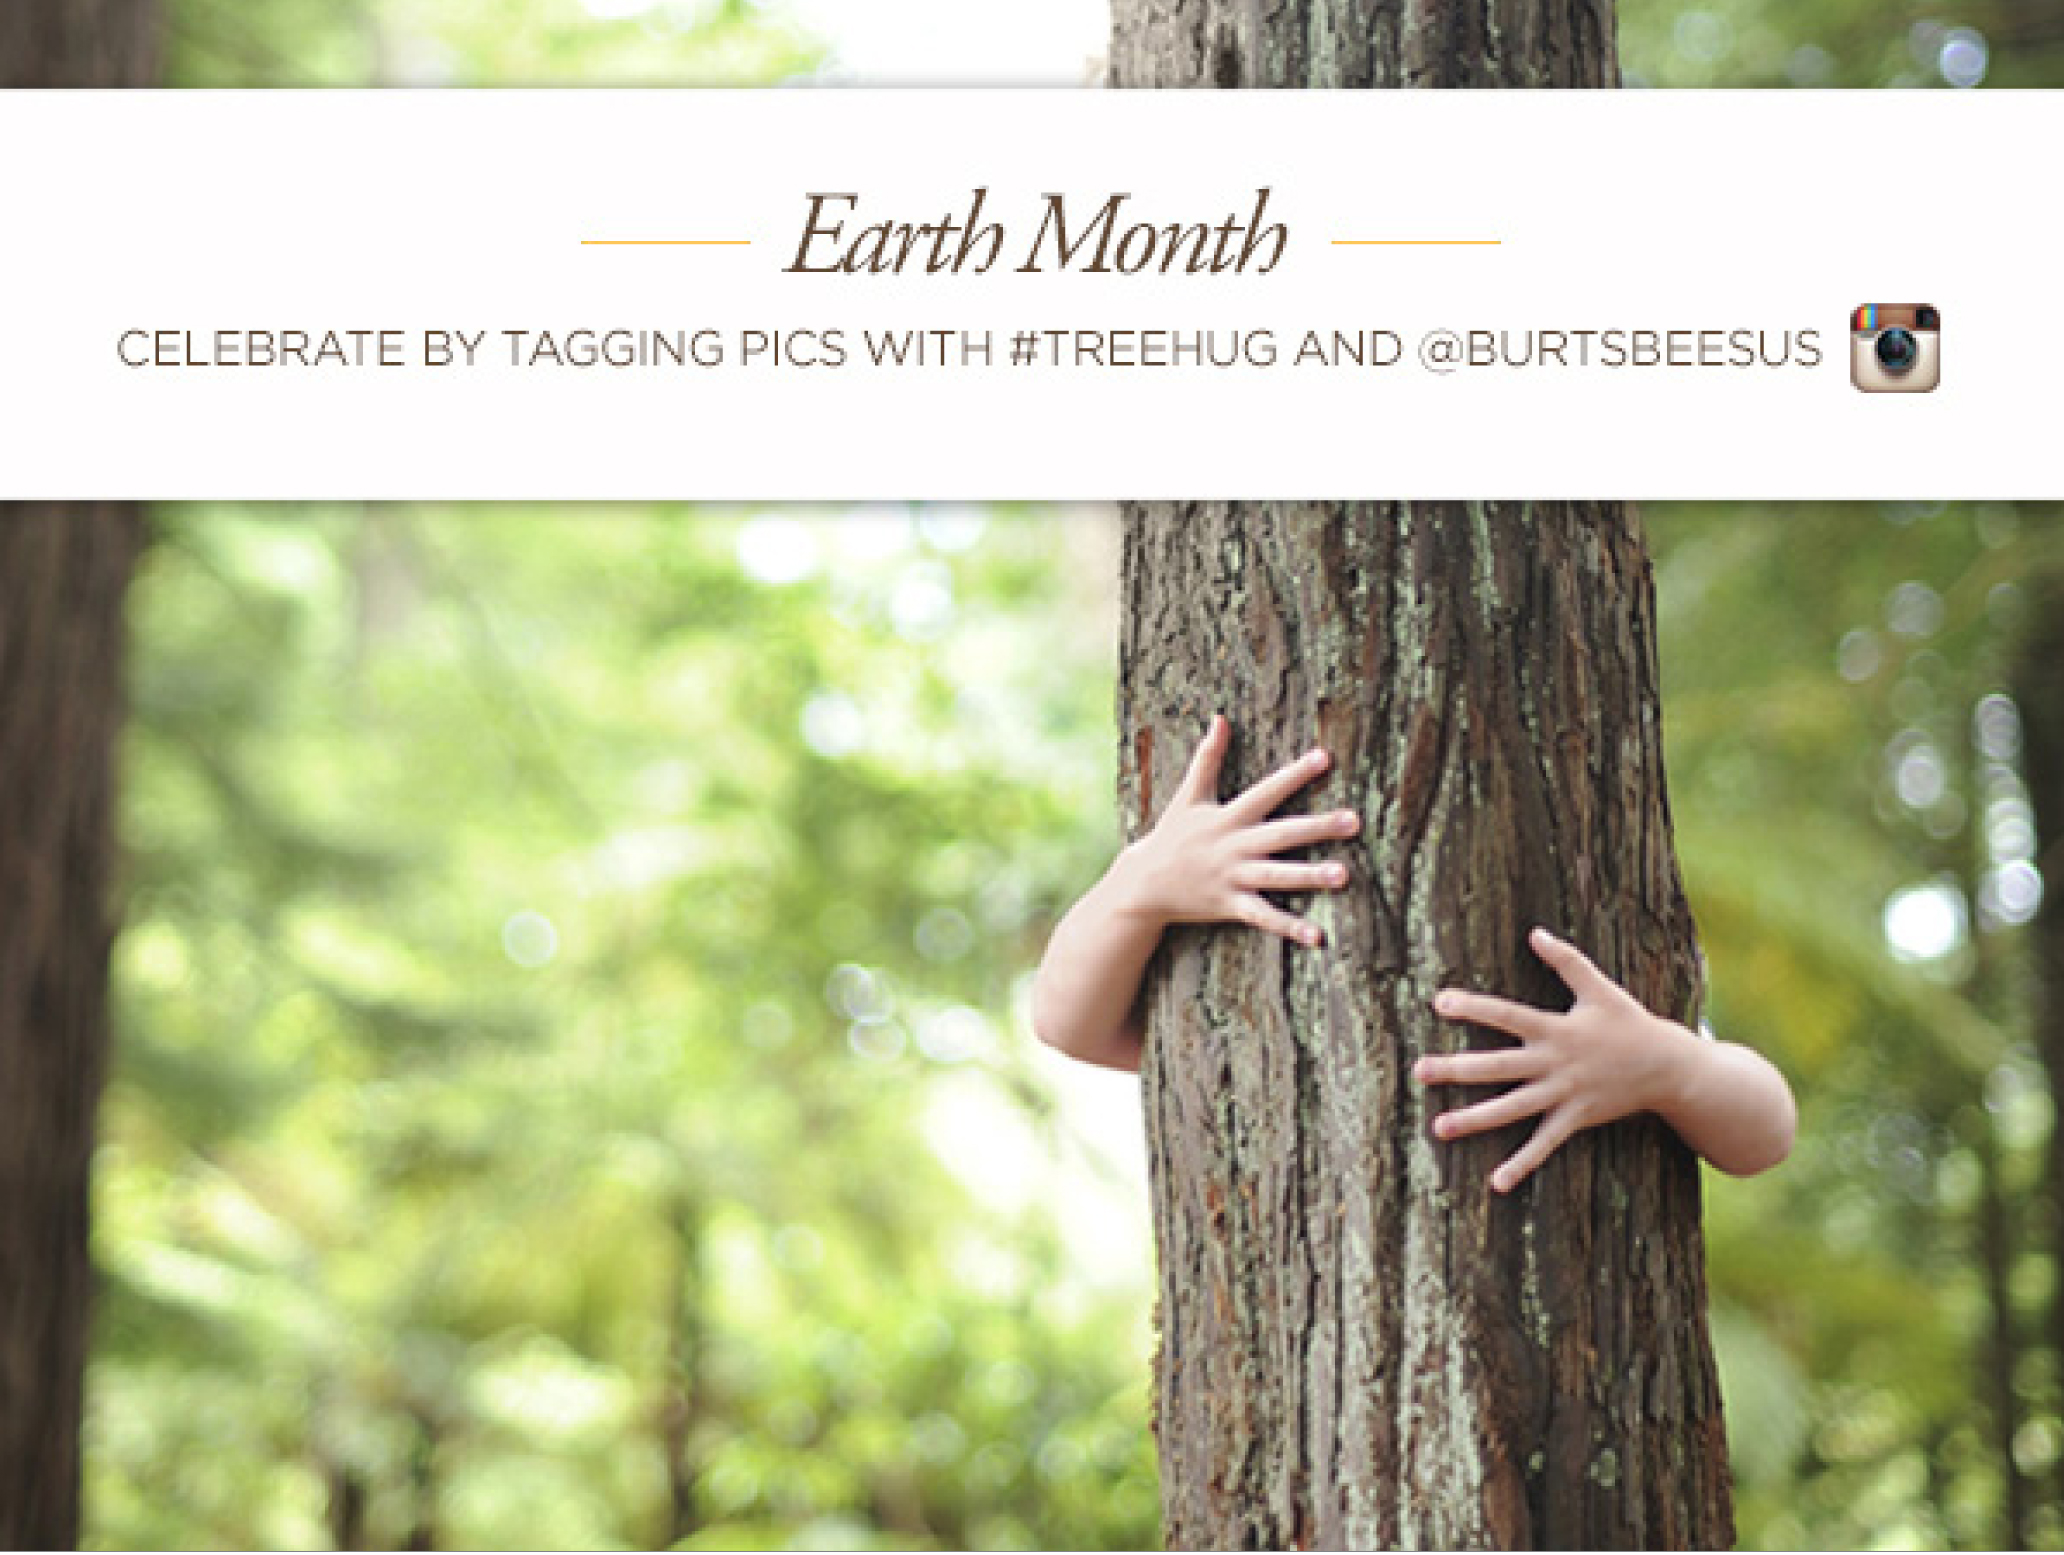  POST COPY: Exciting news! This month is #earthmonth, and we’re asking you to help us show this great planet a little love. How you ask? By hugging a tree! Wrap your arms around your nearest leafy giant, take a pic, post it, and tag us. And we’ll do 